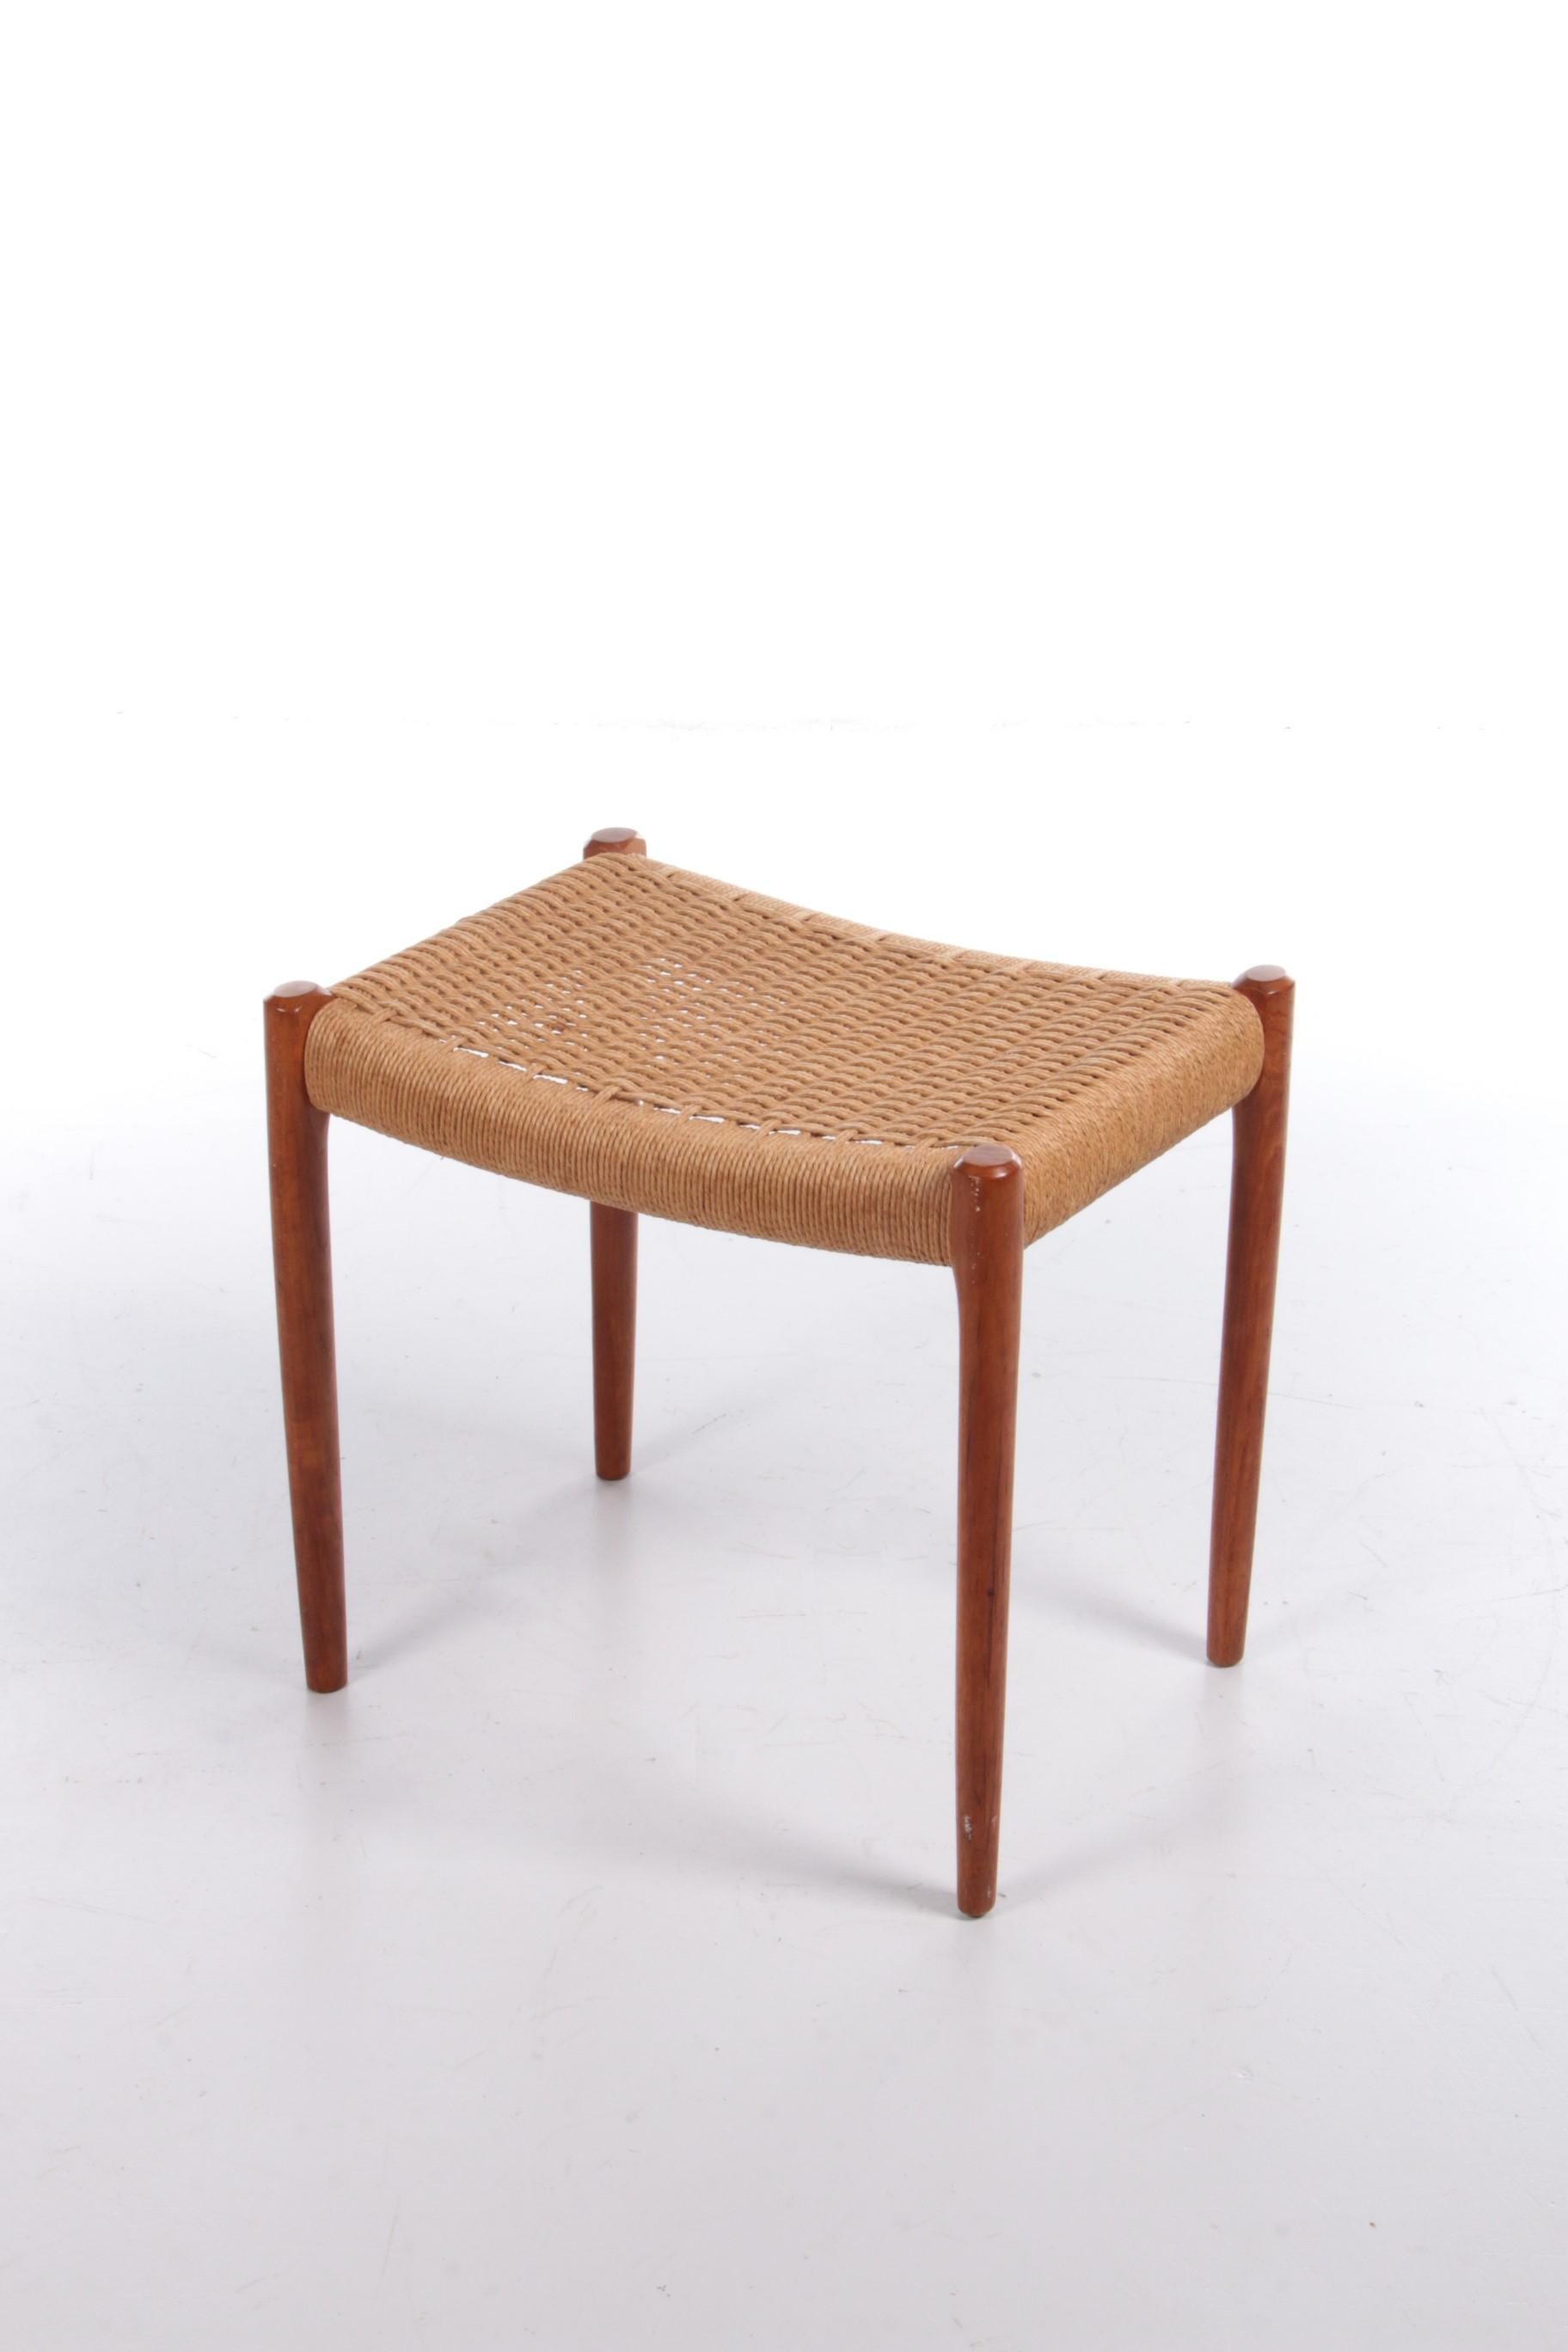 Niels Otto Møller Model 80a teak wood with papercord Denmark 1960

Very nice and rare stool model 80A designed by Niels Otto Møller and manufactured by J.L. Møller Mobelfabrik, Denmark 1951. This beautifully shaped Scandinavian stool is made of